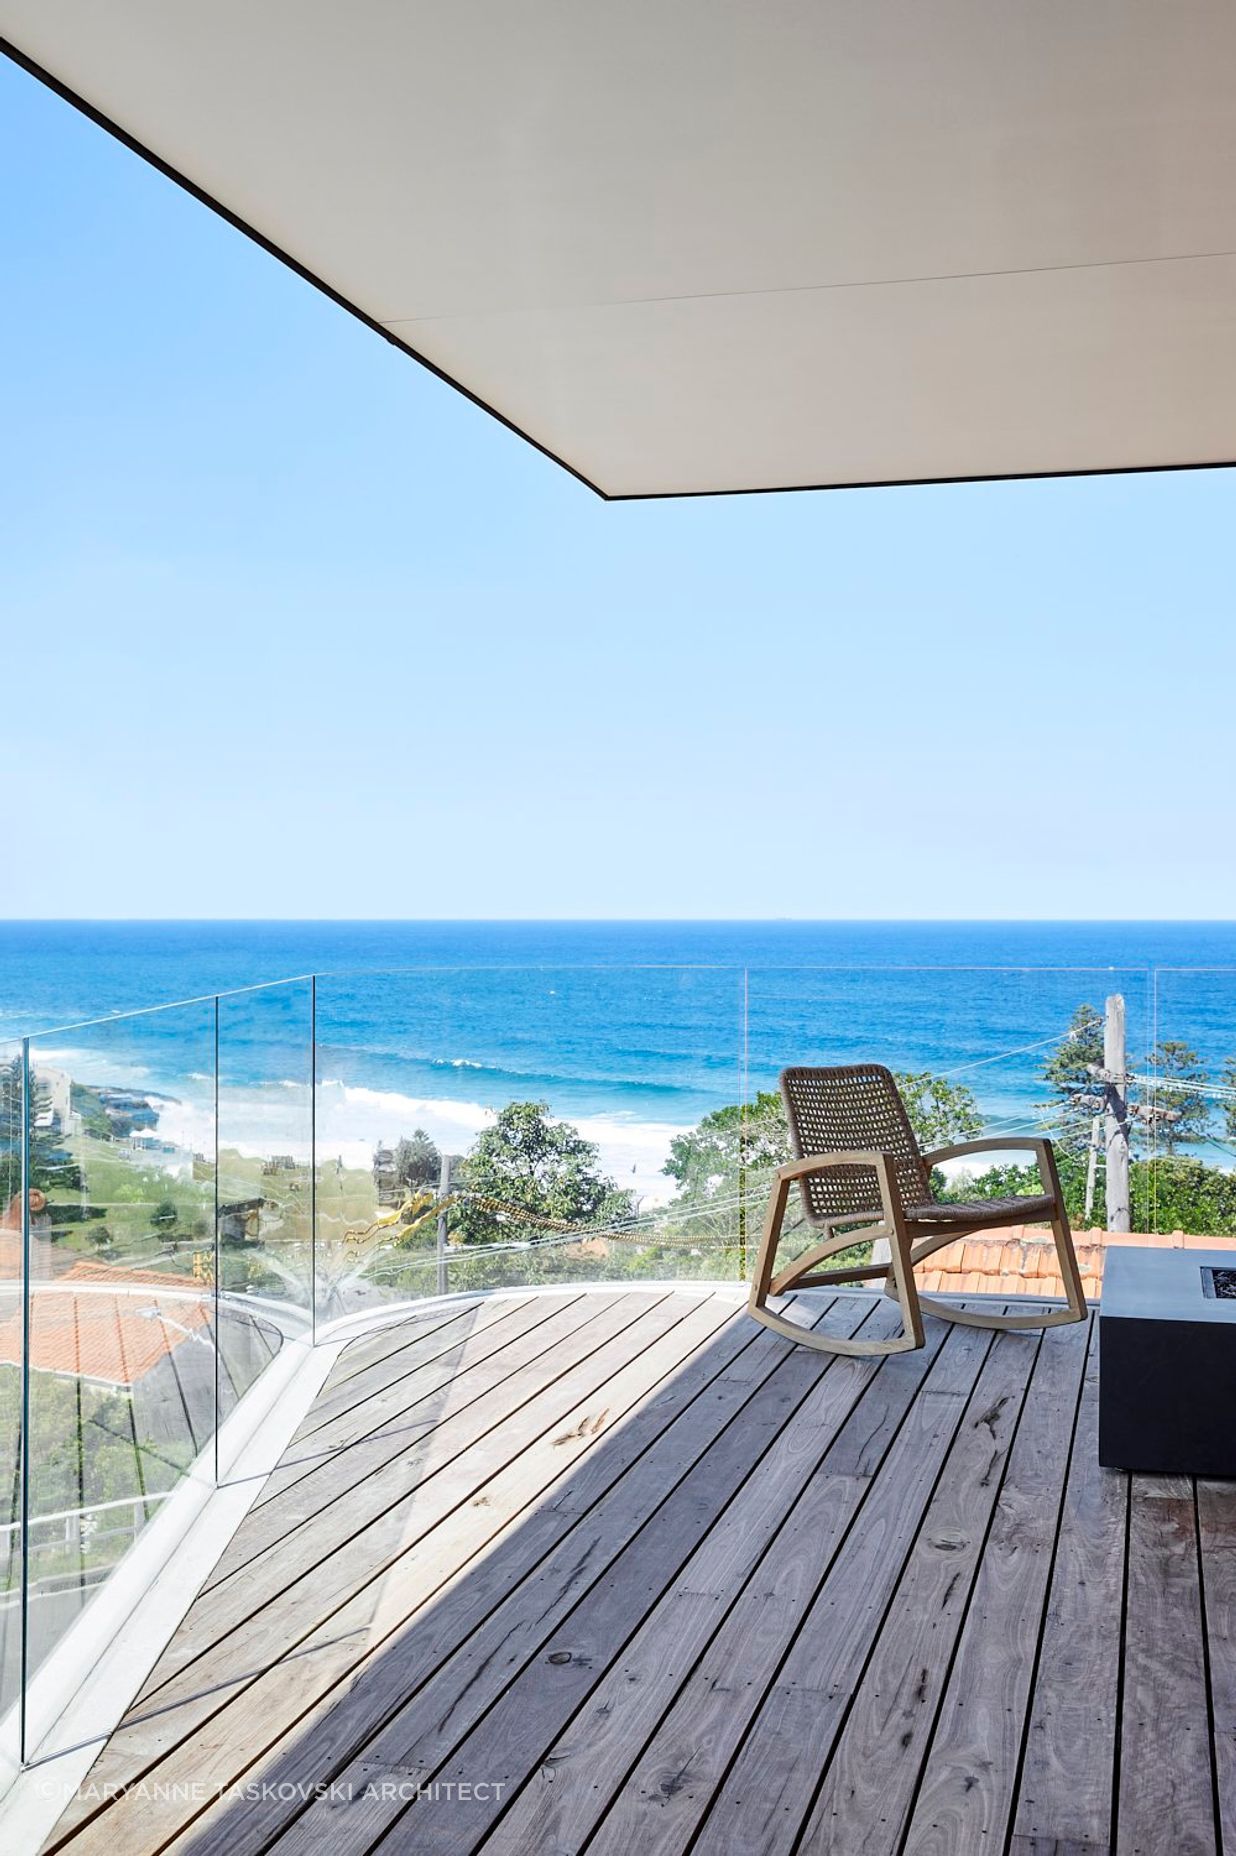 The balcony provides the perfect spot to the enjoy the eye-catching views of Bronte beach.  Photography: Pablo Veiga.